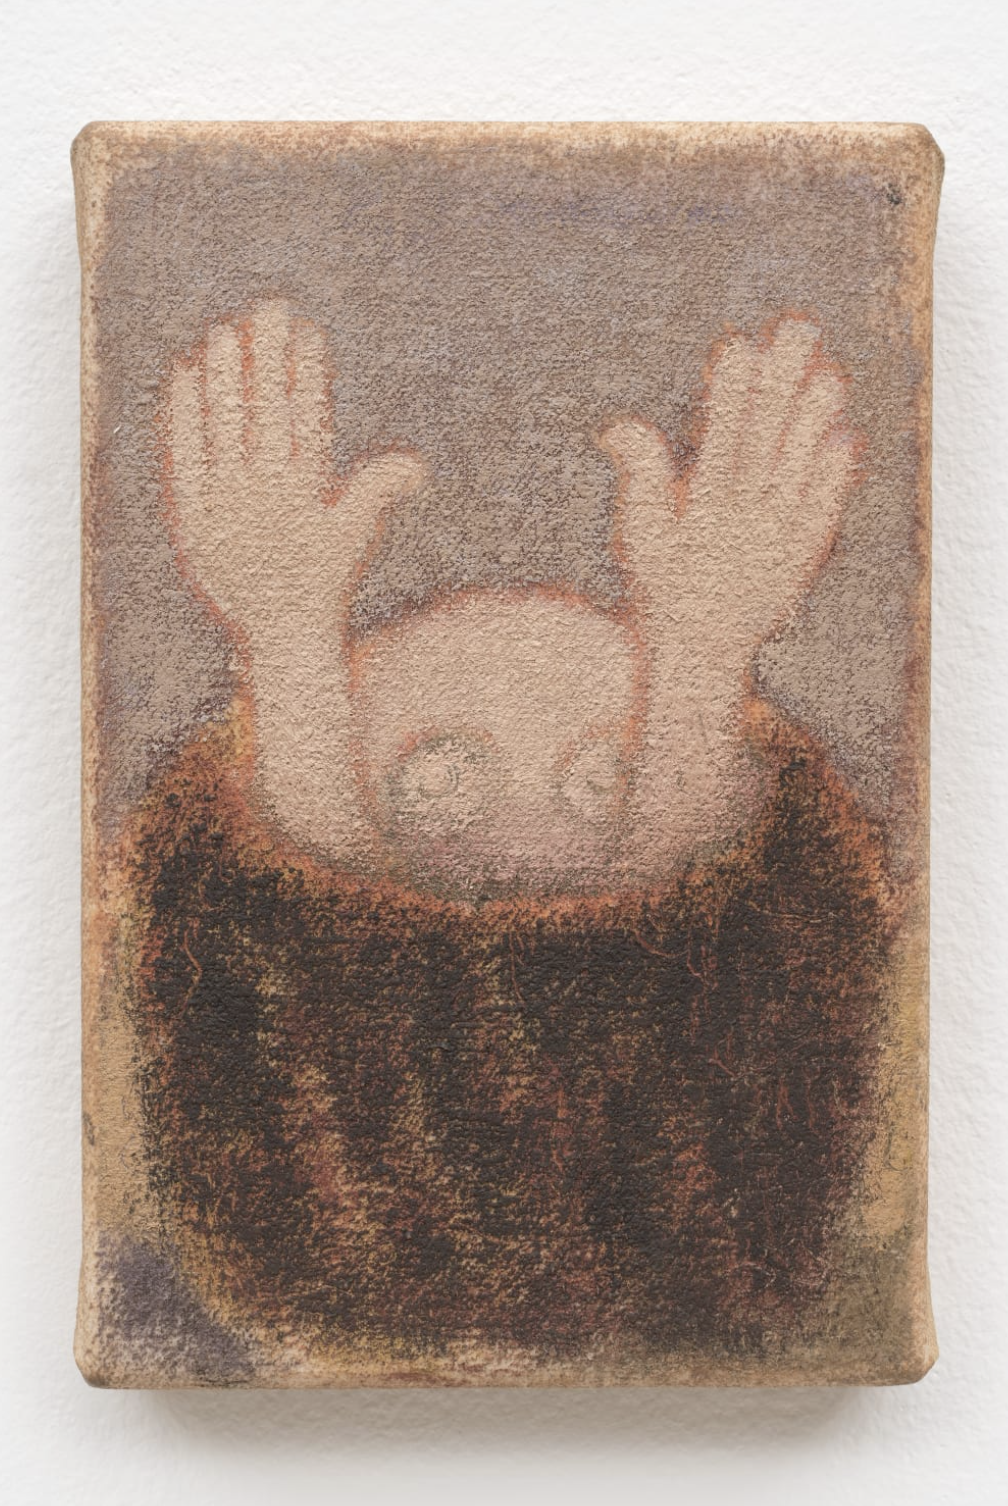   The Crackless Egg , 2022  Oil on canvas  15 x 10.4 x 2.3 cm 5 7/8 x 4 1/8 x 7/8 in 